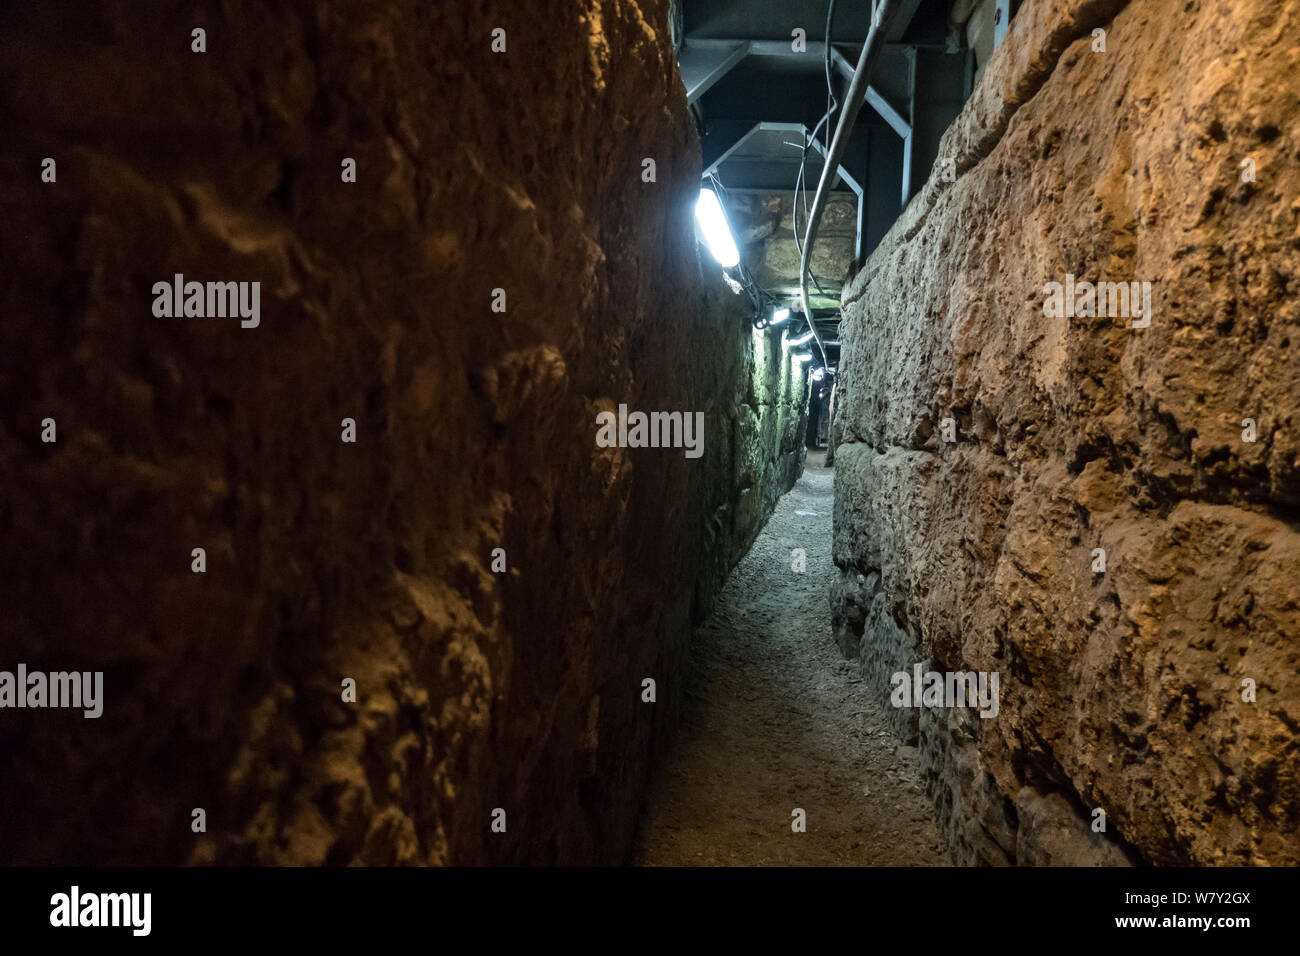 Jerusalem, Israel. 7th August, 2019. A dry tunnel beneath the Herodian Pilgrimage Road connects the City of David with what was the Temple Mount complex, now the Ophel Archaeological Park adjacent to the Western Wall. It is believed to have been dug as a drainage tunnel or hideout for city residents from attacking Romans in the Second Temple period. The City of David is speculated to be the original urban core of ancient Jerusalem. Religious Jews are in the midst of observing the 'Three Weeks' or 'Bein HaMetzarim', a period of mourning over the destruction of the first and second Jewish Temple Stock Photo